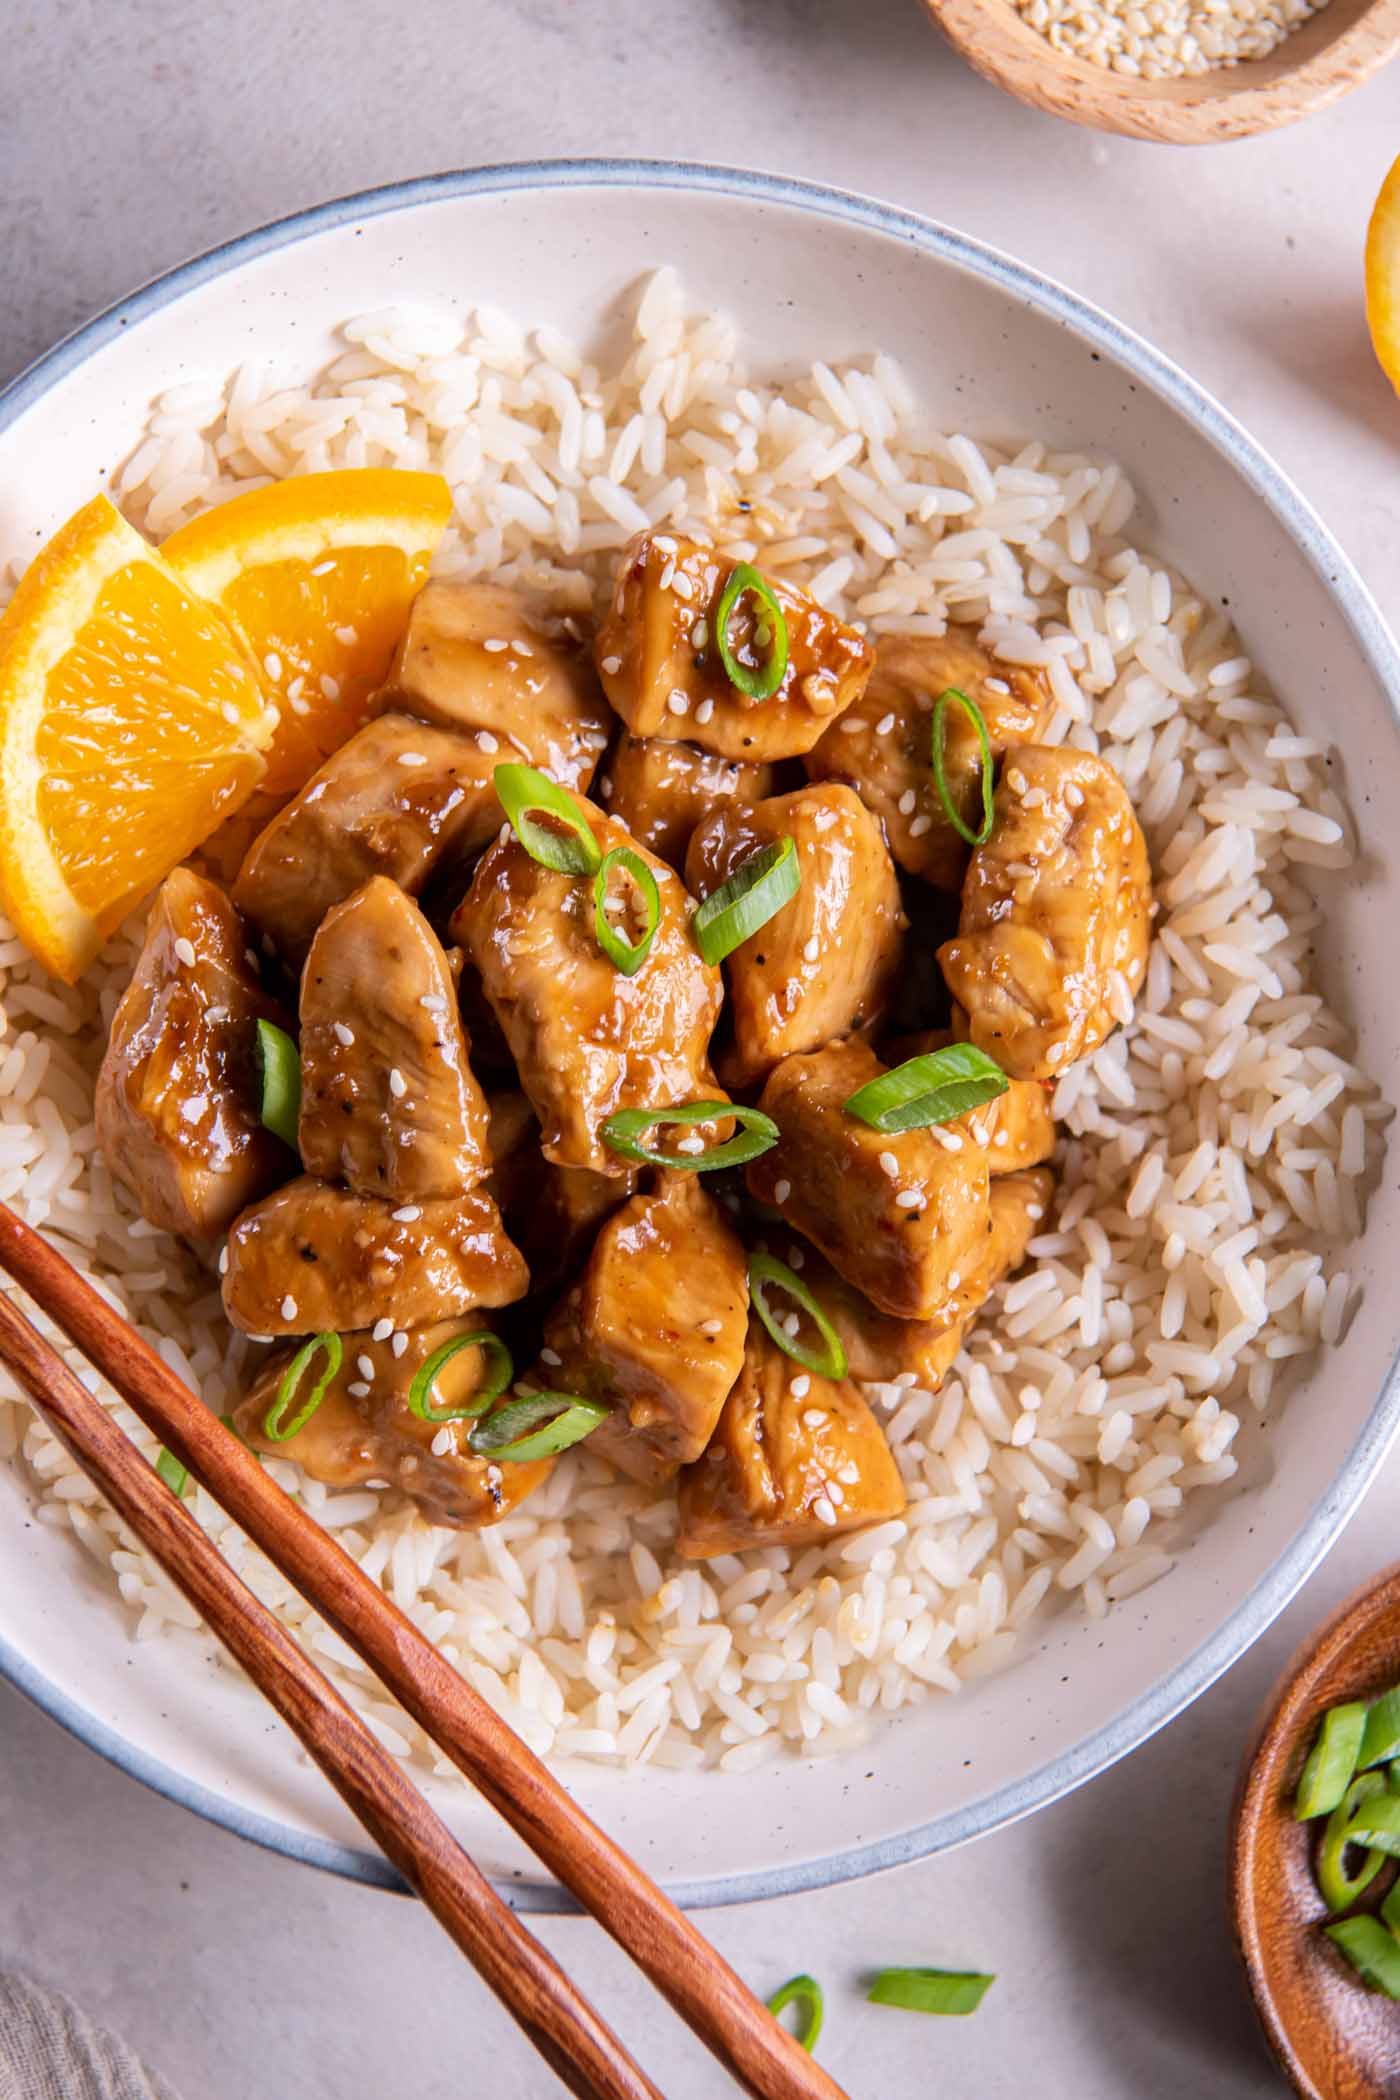 Orange chicken served over white rice and garnished with orange slices, sesame seeds and green onions.